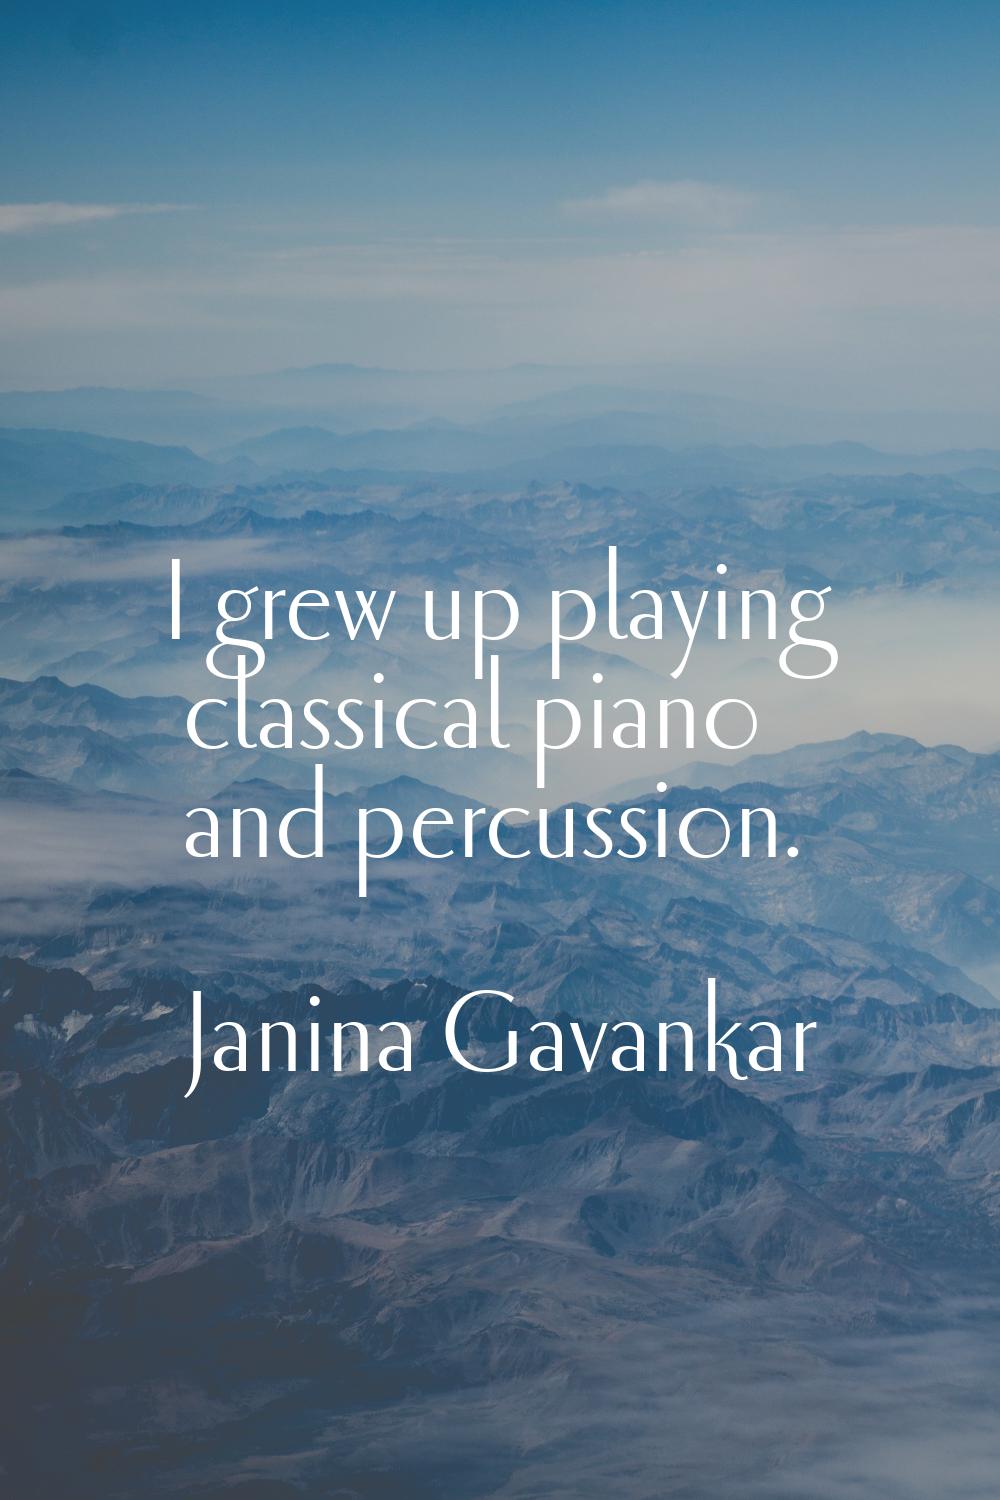 I grew up playing classical piano and percussion.